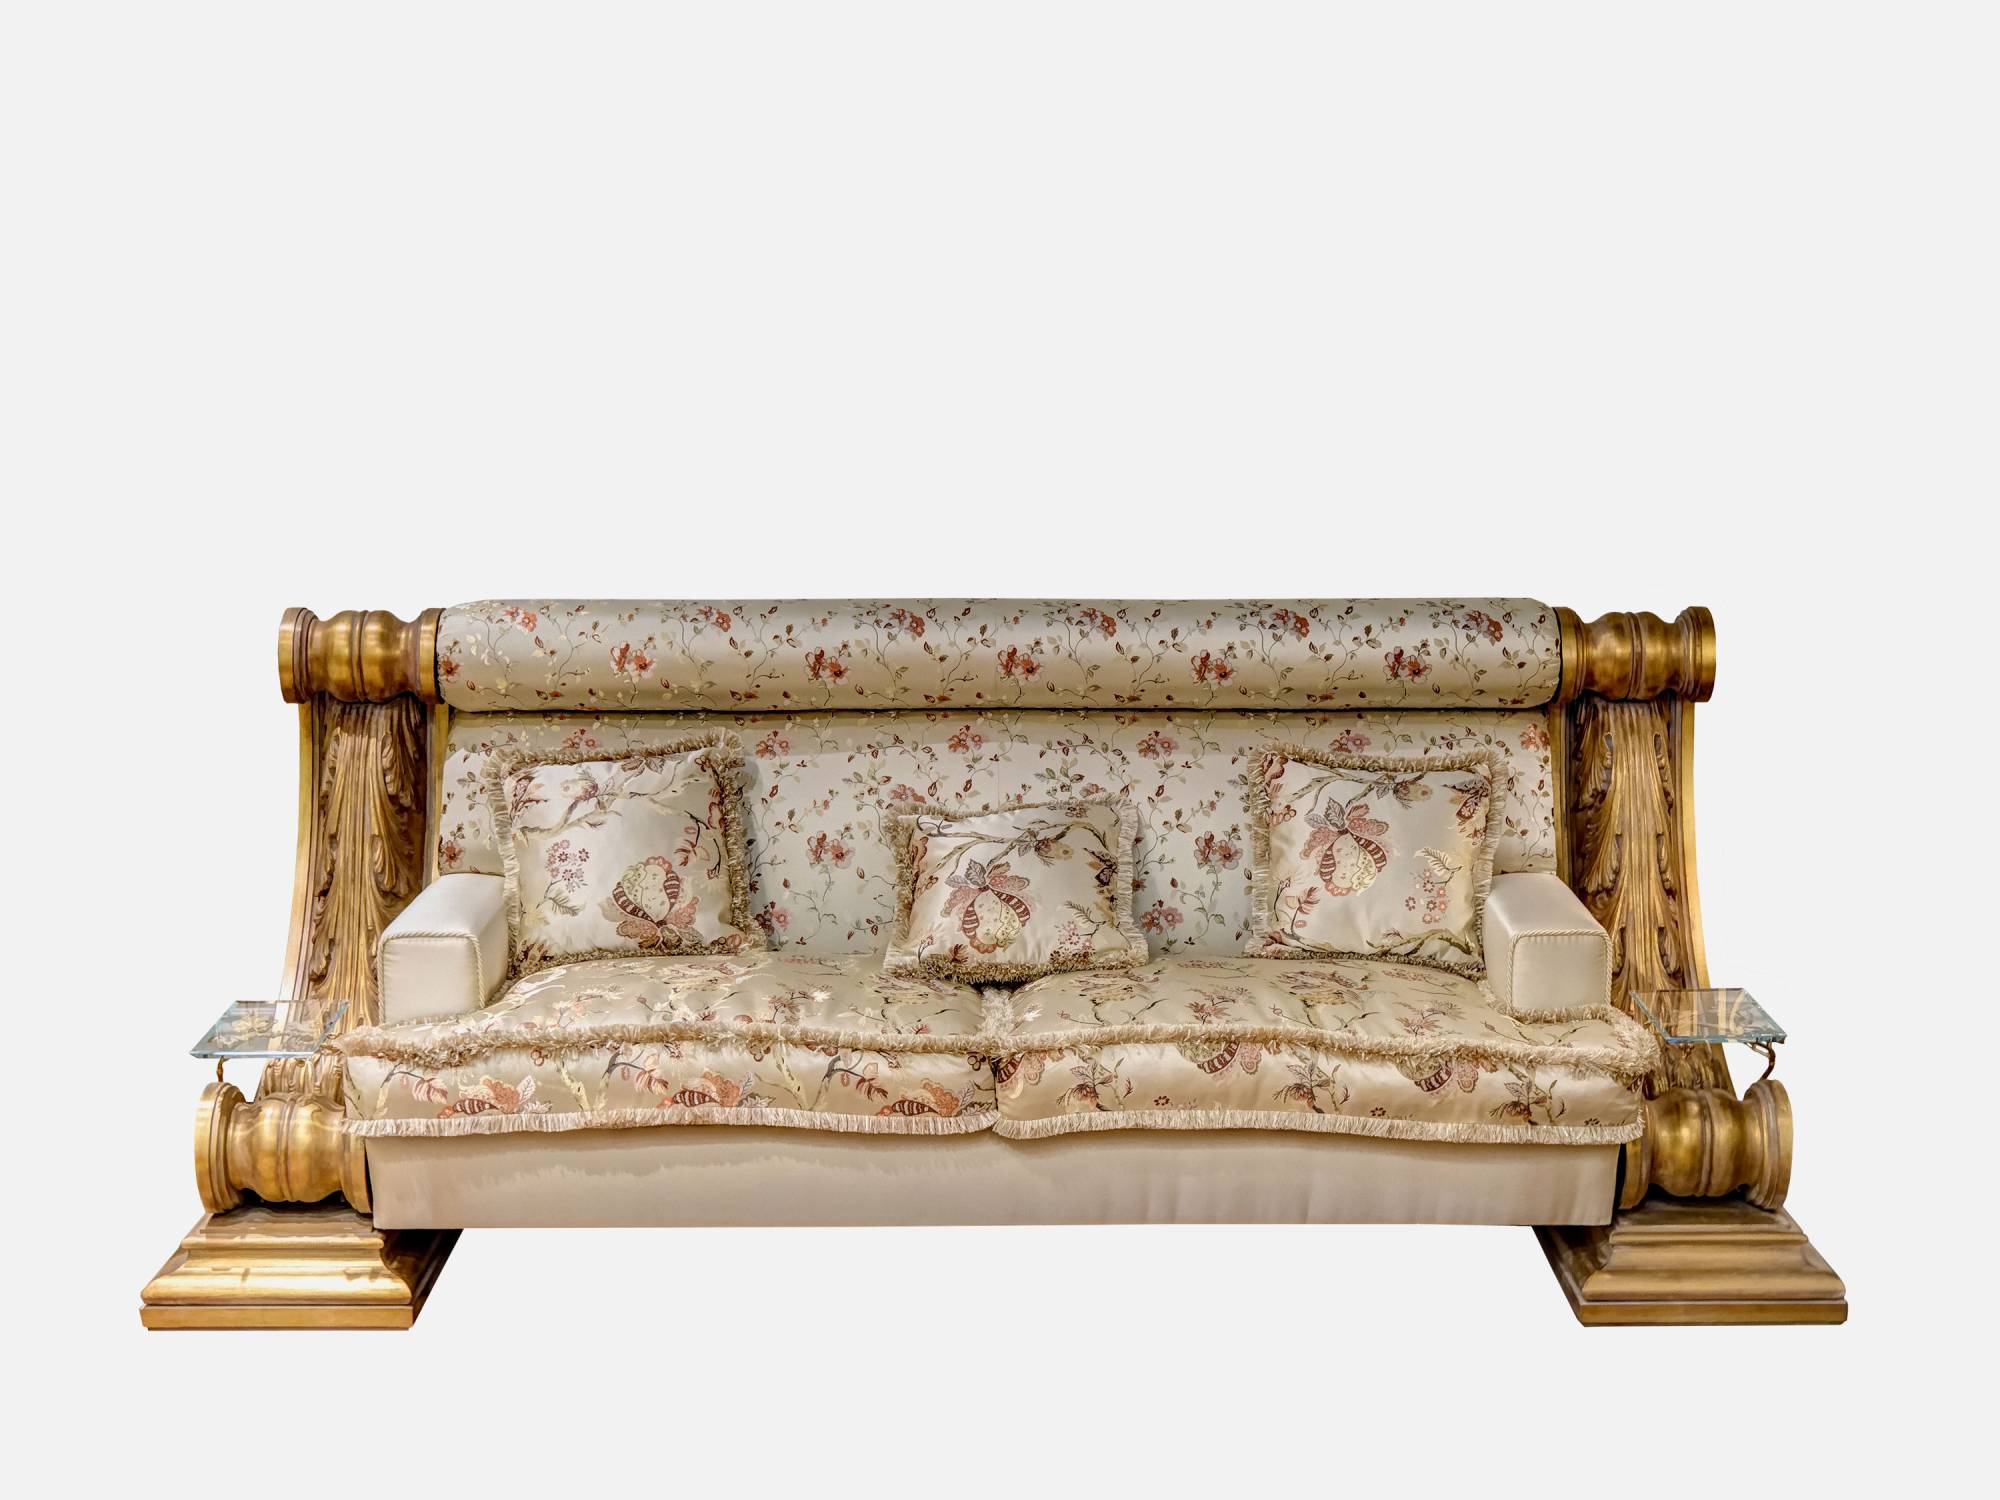 ART. 2087 – The elegance of luxury classic Sofas made in Italy by C.G. Capelletti.